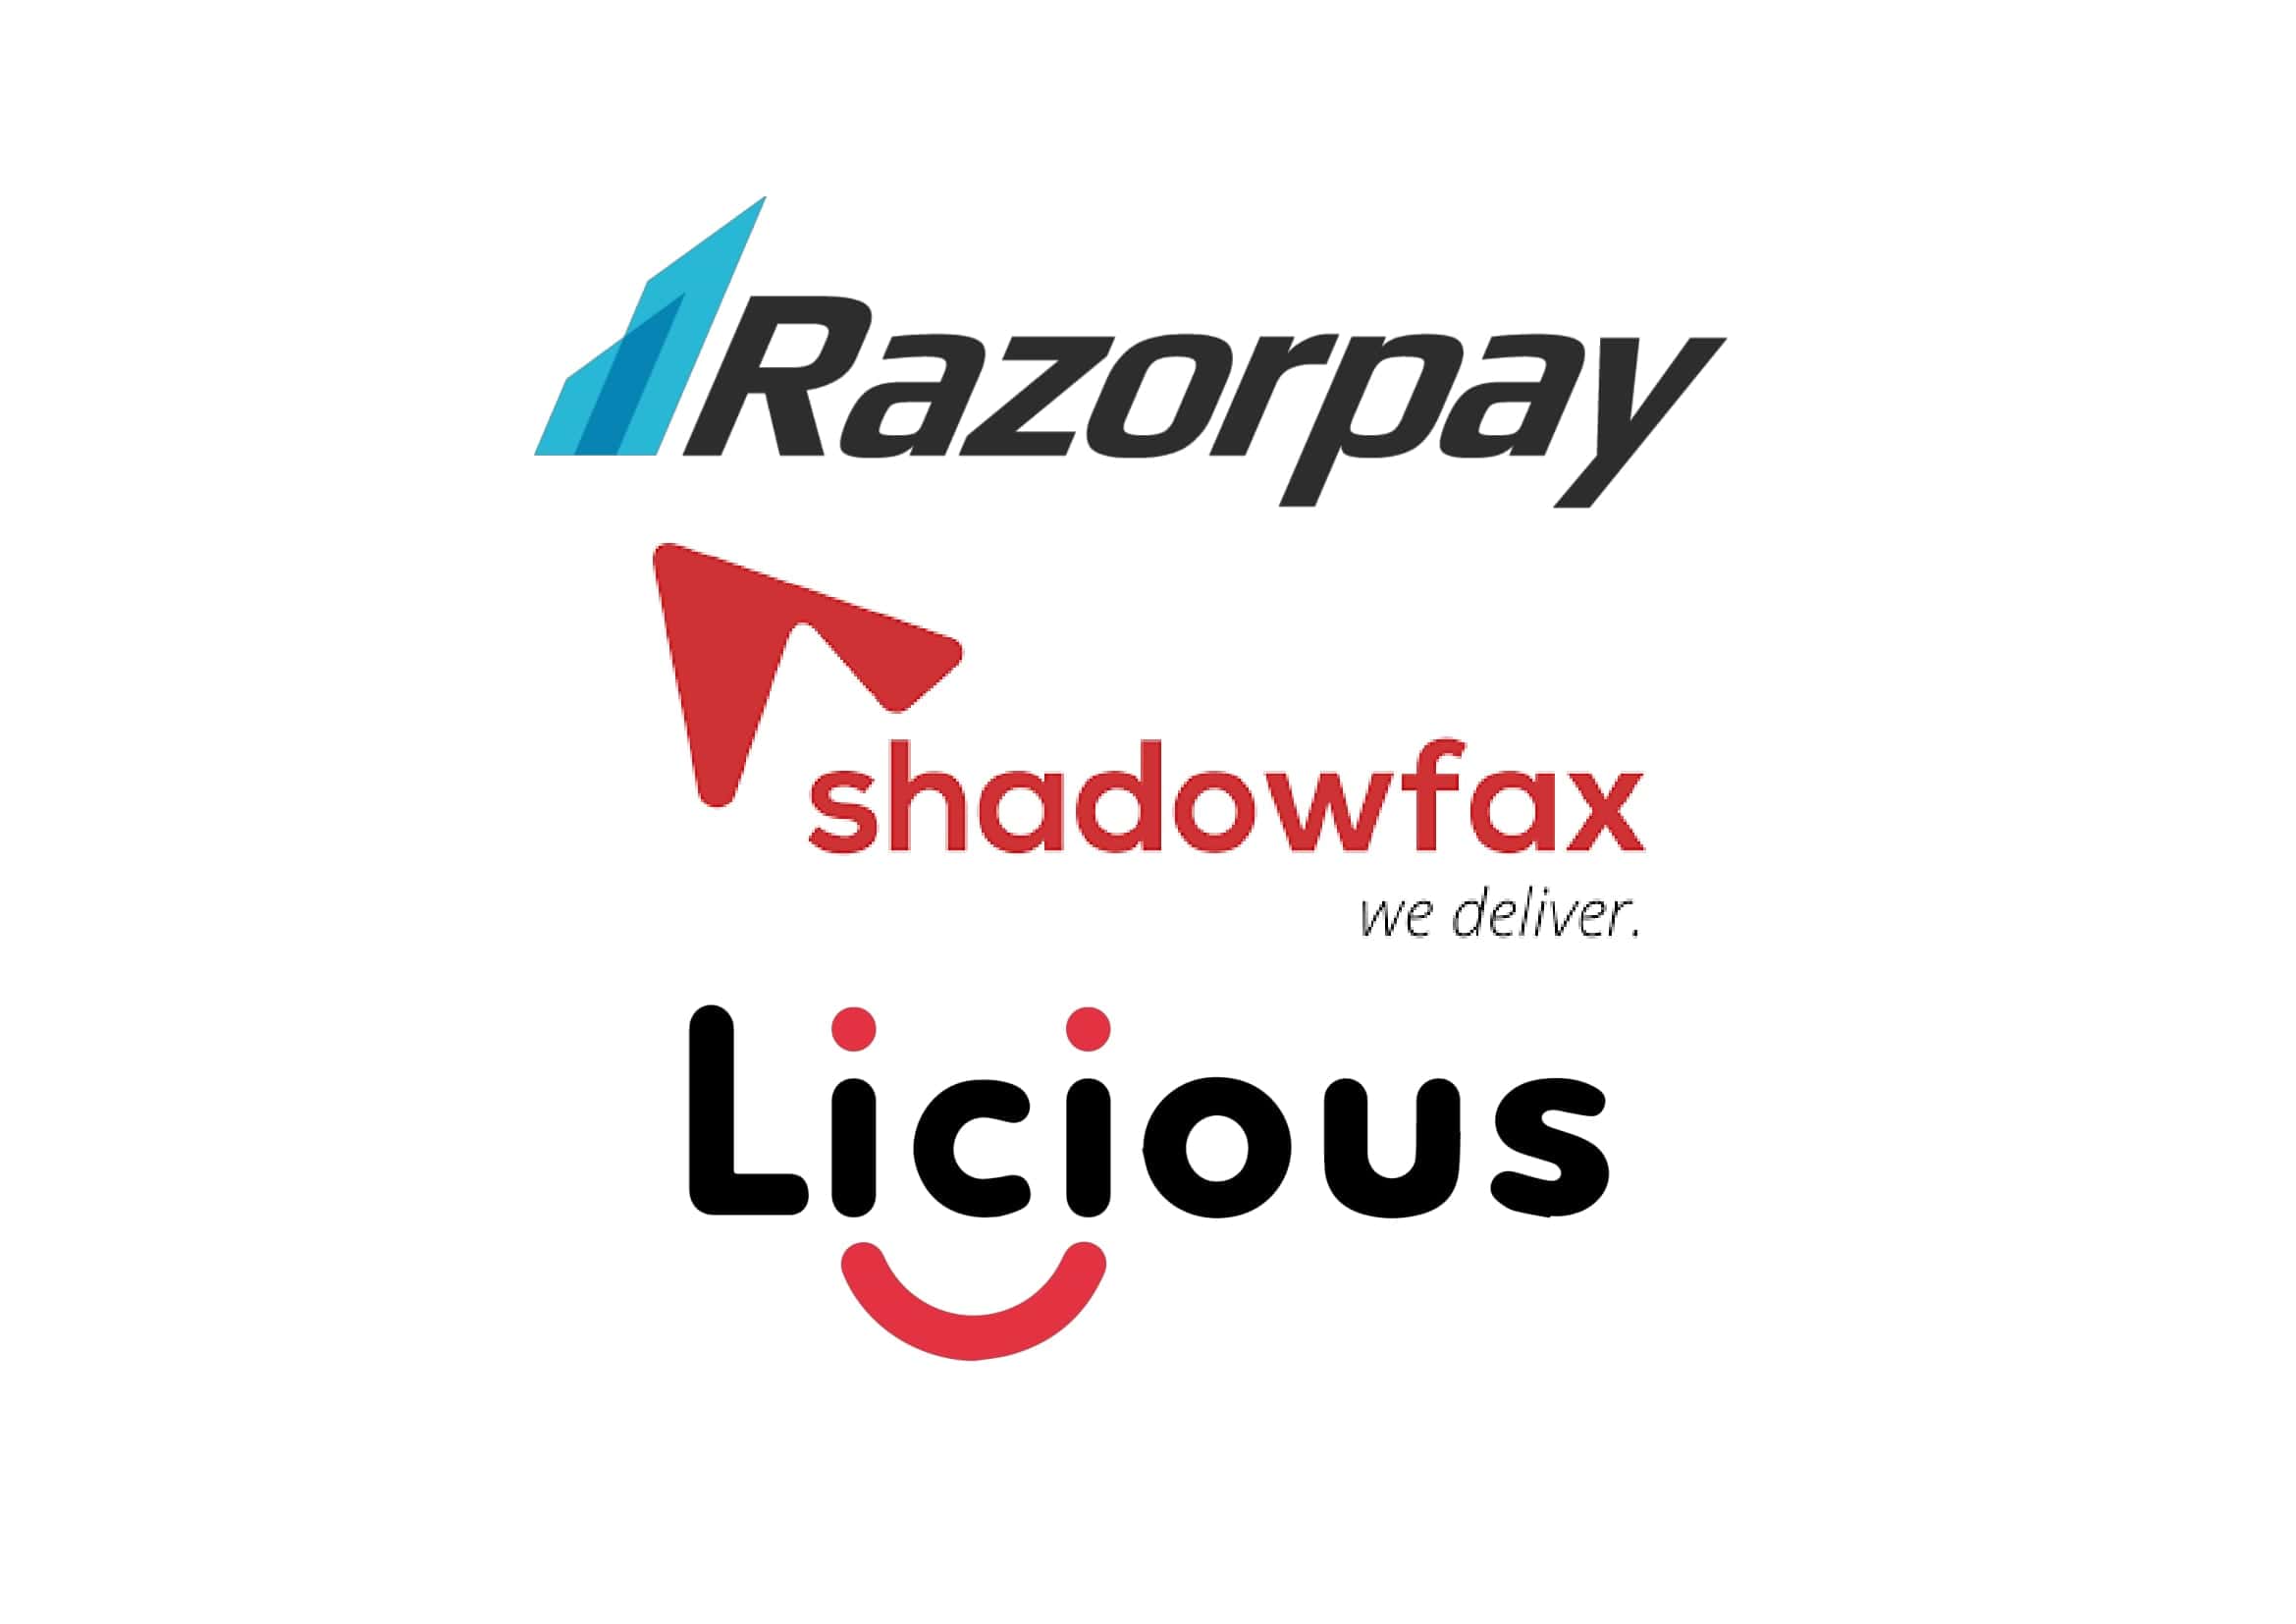 Razorpay is a payments platform for online businesses in India. Razorpay helps businesses accept online payments via Credit Card, Debit Card, Net banking and Wallets from their end customers. Razorpay is known to be a developer oriented payment gateway and focuses on essentials such as 24x7 support, one-line integration code and superior checkout experiences. Razorpay’s investors include MasterCard, Tiger Global, and Matrix Partners. | Shadowfax is a technology-based logistics service provider, present across India. Shadowfax is redefining local delivery with their proprietary technology and operational excellence. Be it first or last mile, Shadowfax offers its clients the most efficient, convenient and reliable delivery solutions. | Licious is India's best online meat shop. It was started with a simple vision that everyone should enjoy fresh, hygienic, quality meat and seafood.